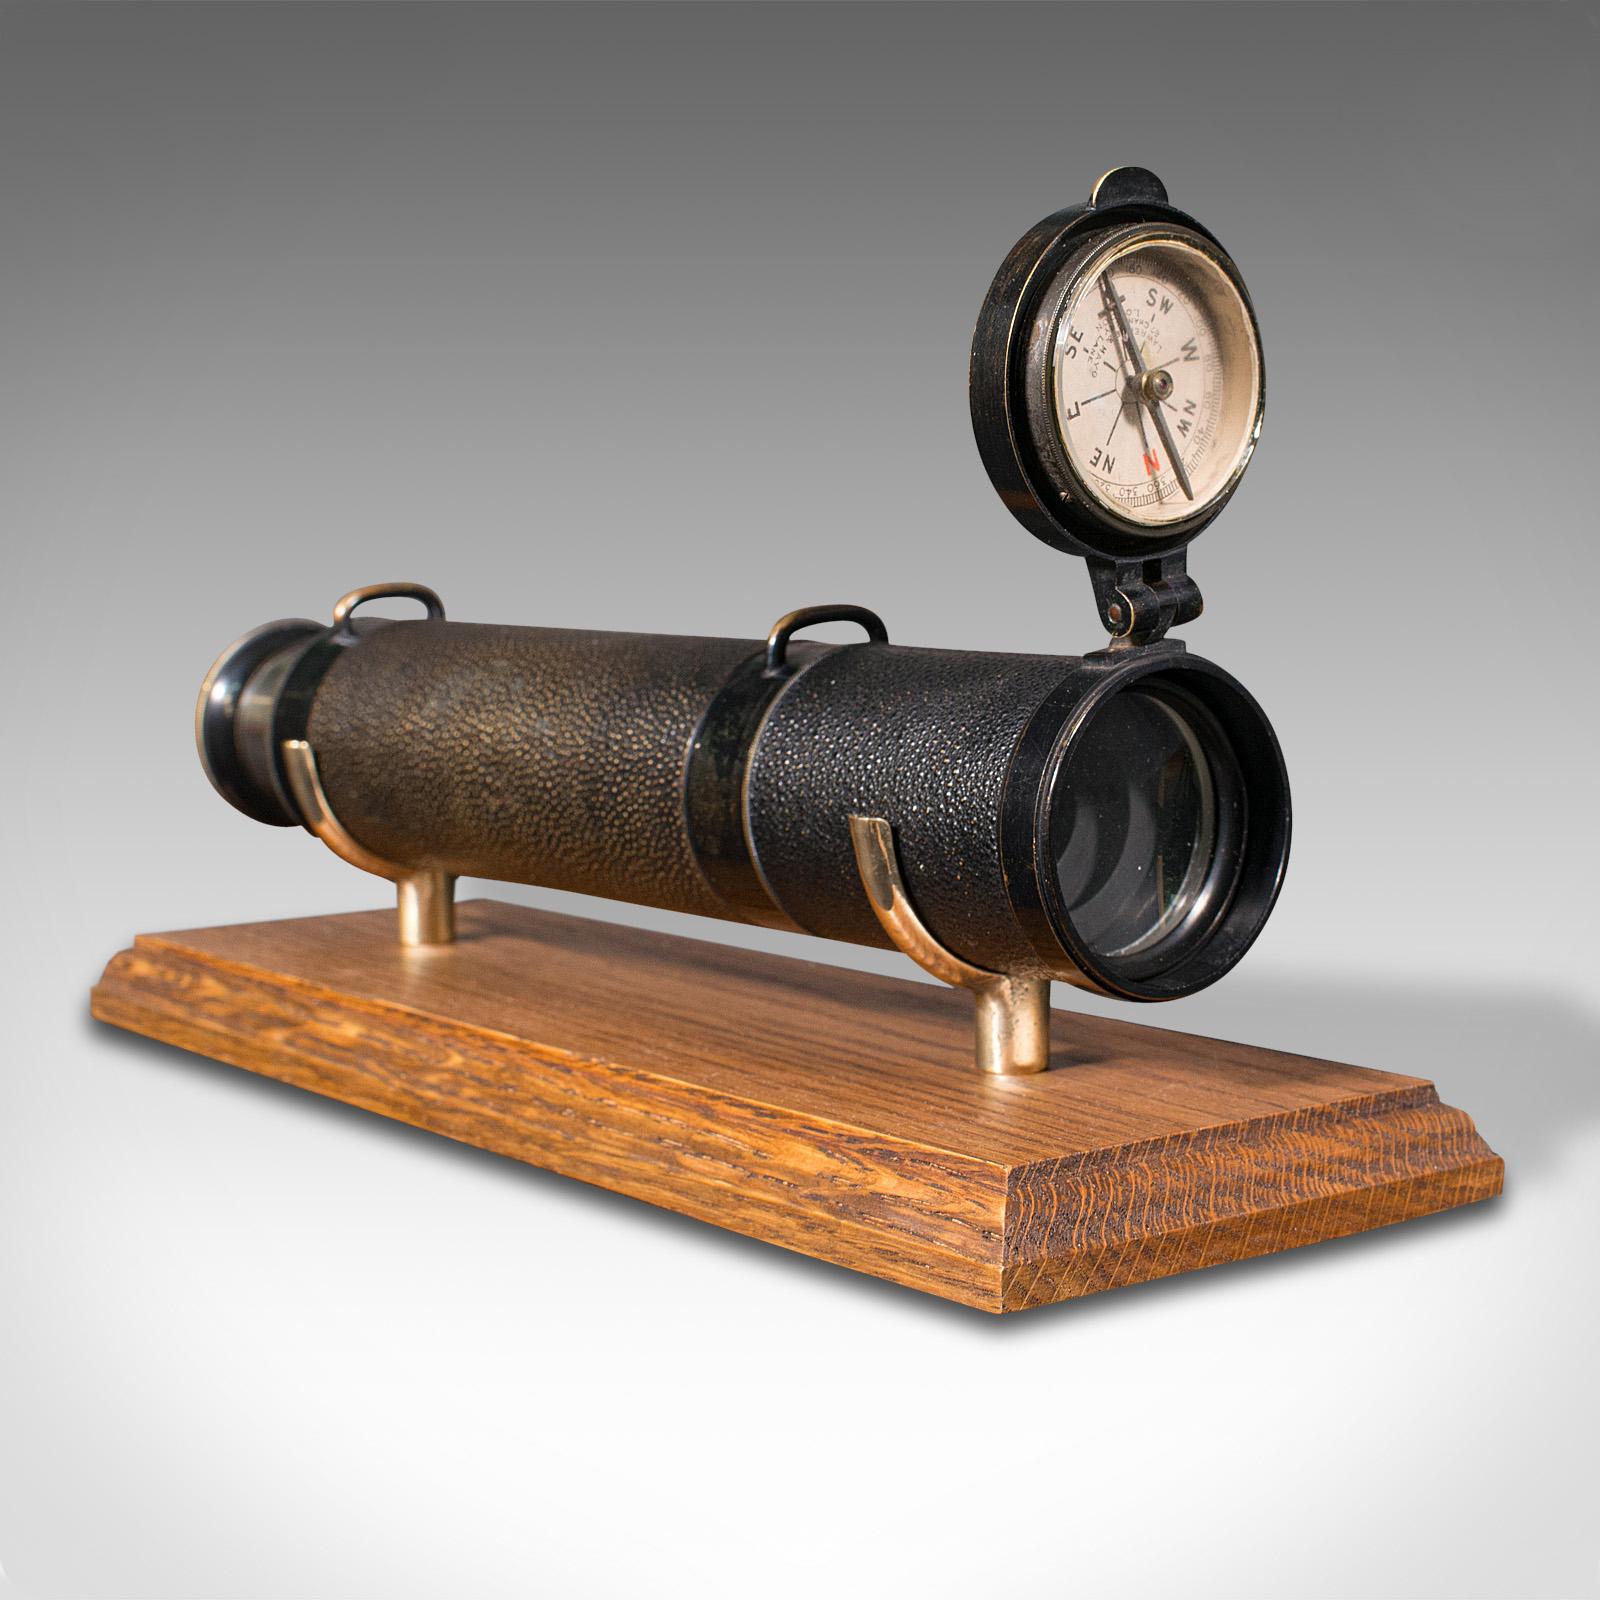 19th Century Antique 3 Draw Telescope, English, Terrestrial, Lawrence & Mayo, Victorian, 1900